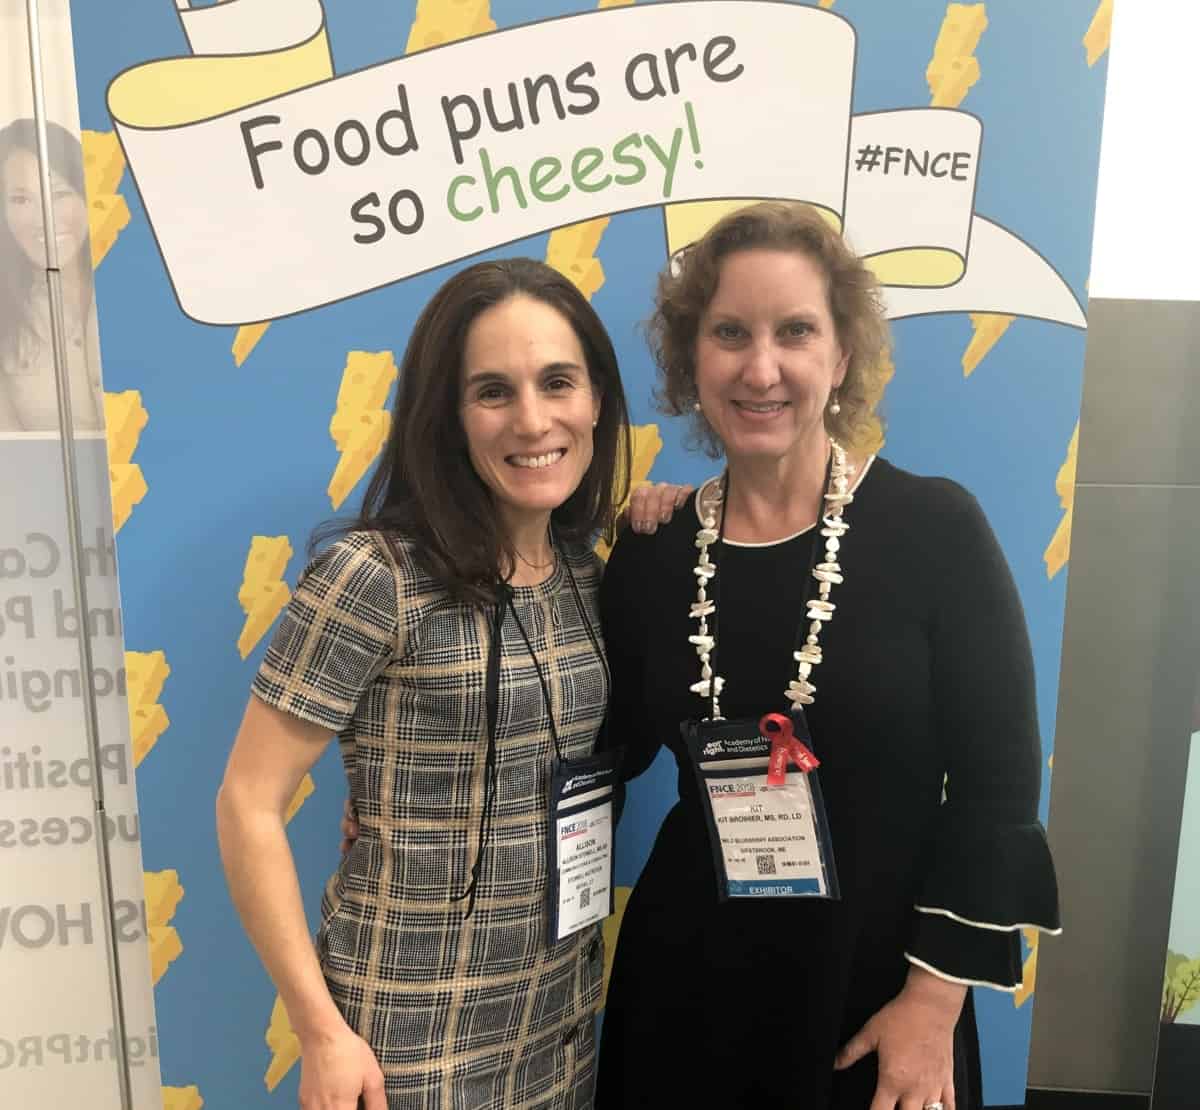 Kit and Alli at FNCE 2018